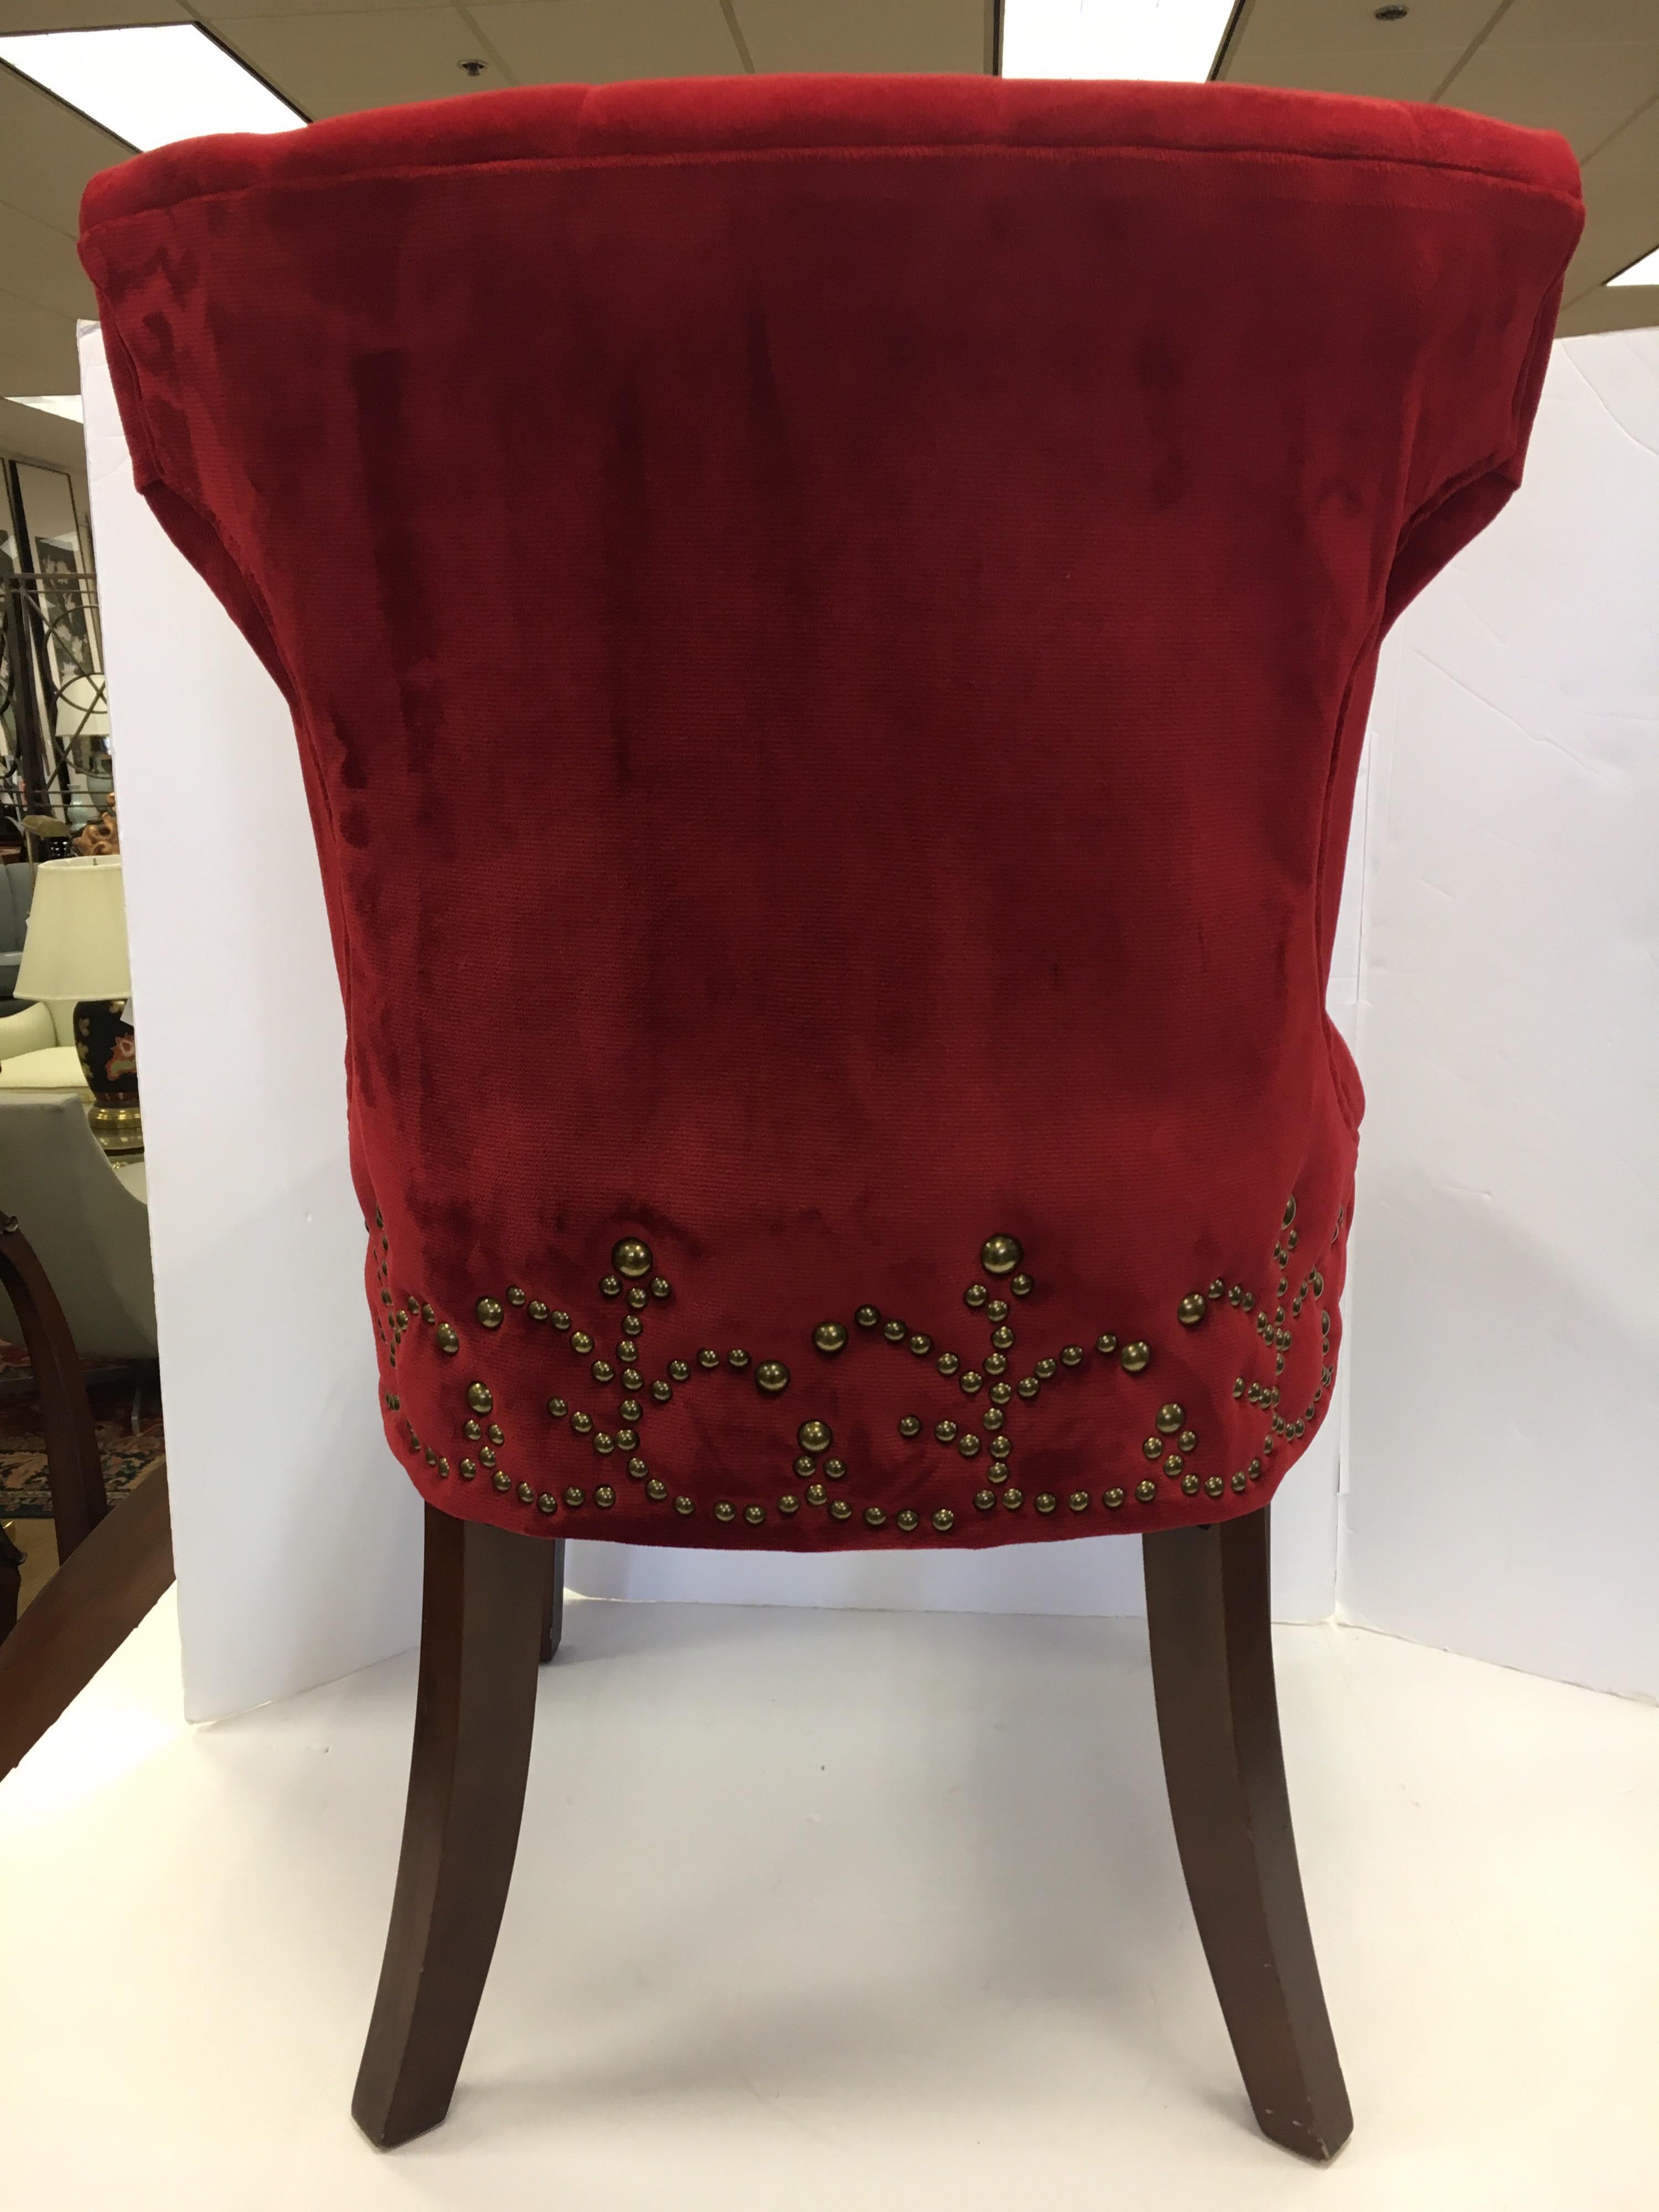 Stunning red cotton fabric upholstery on tufted dining chairs, set of four, with one of a kind nailhead pattern throughout which looks like a work of art.